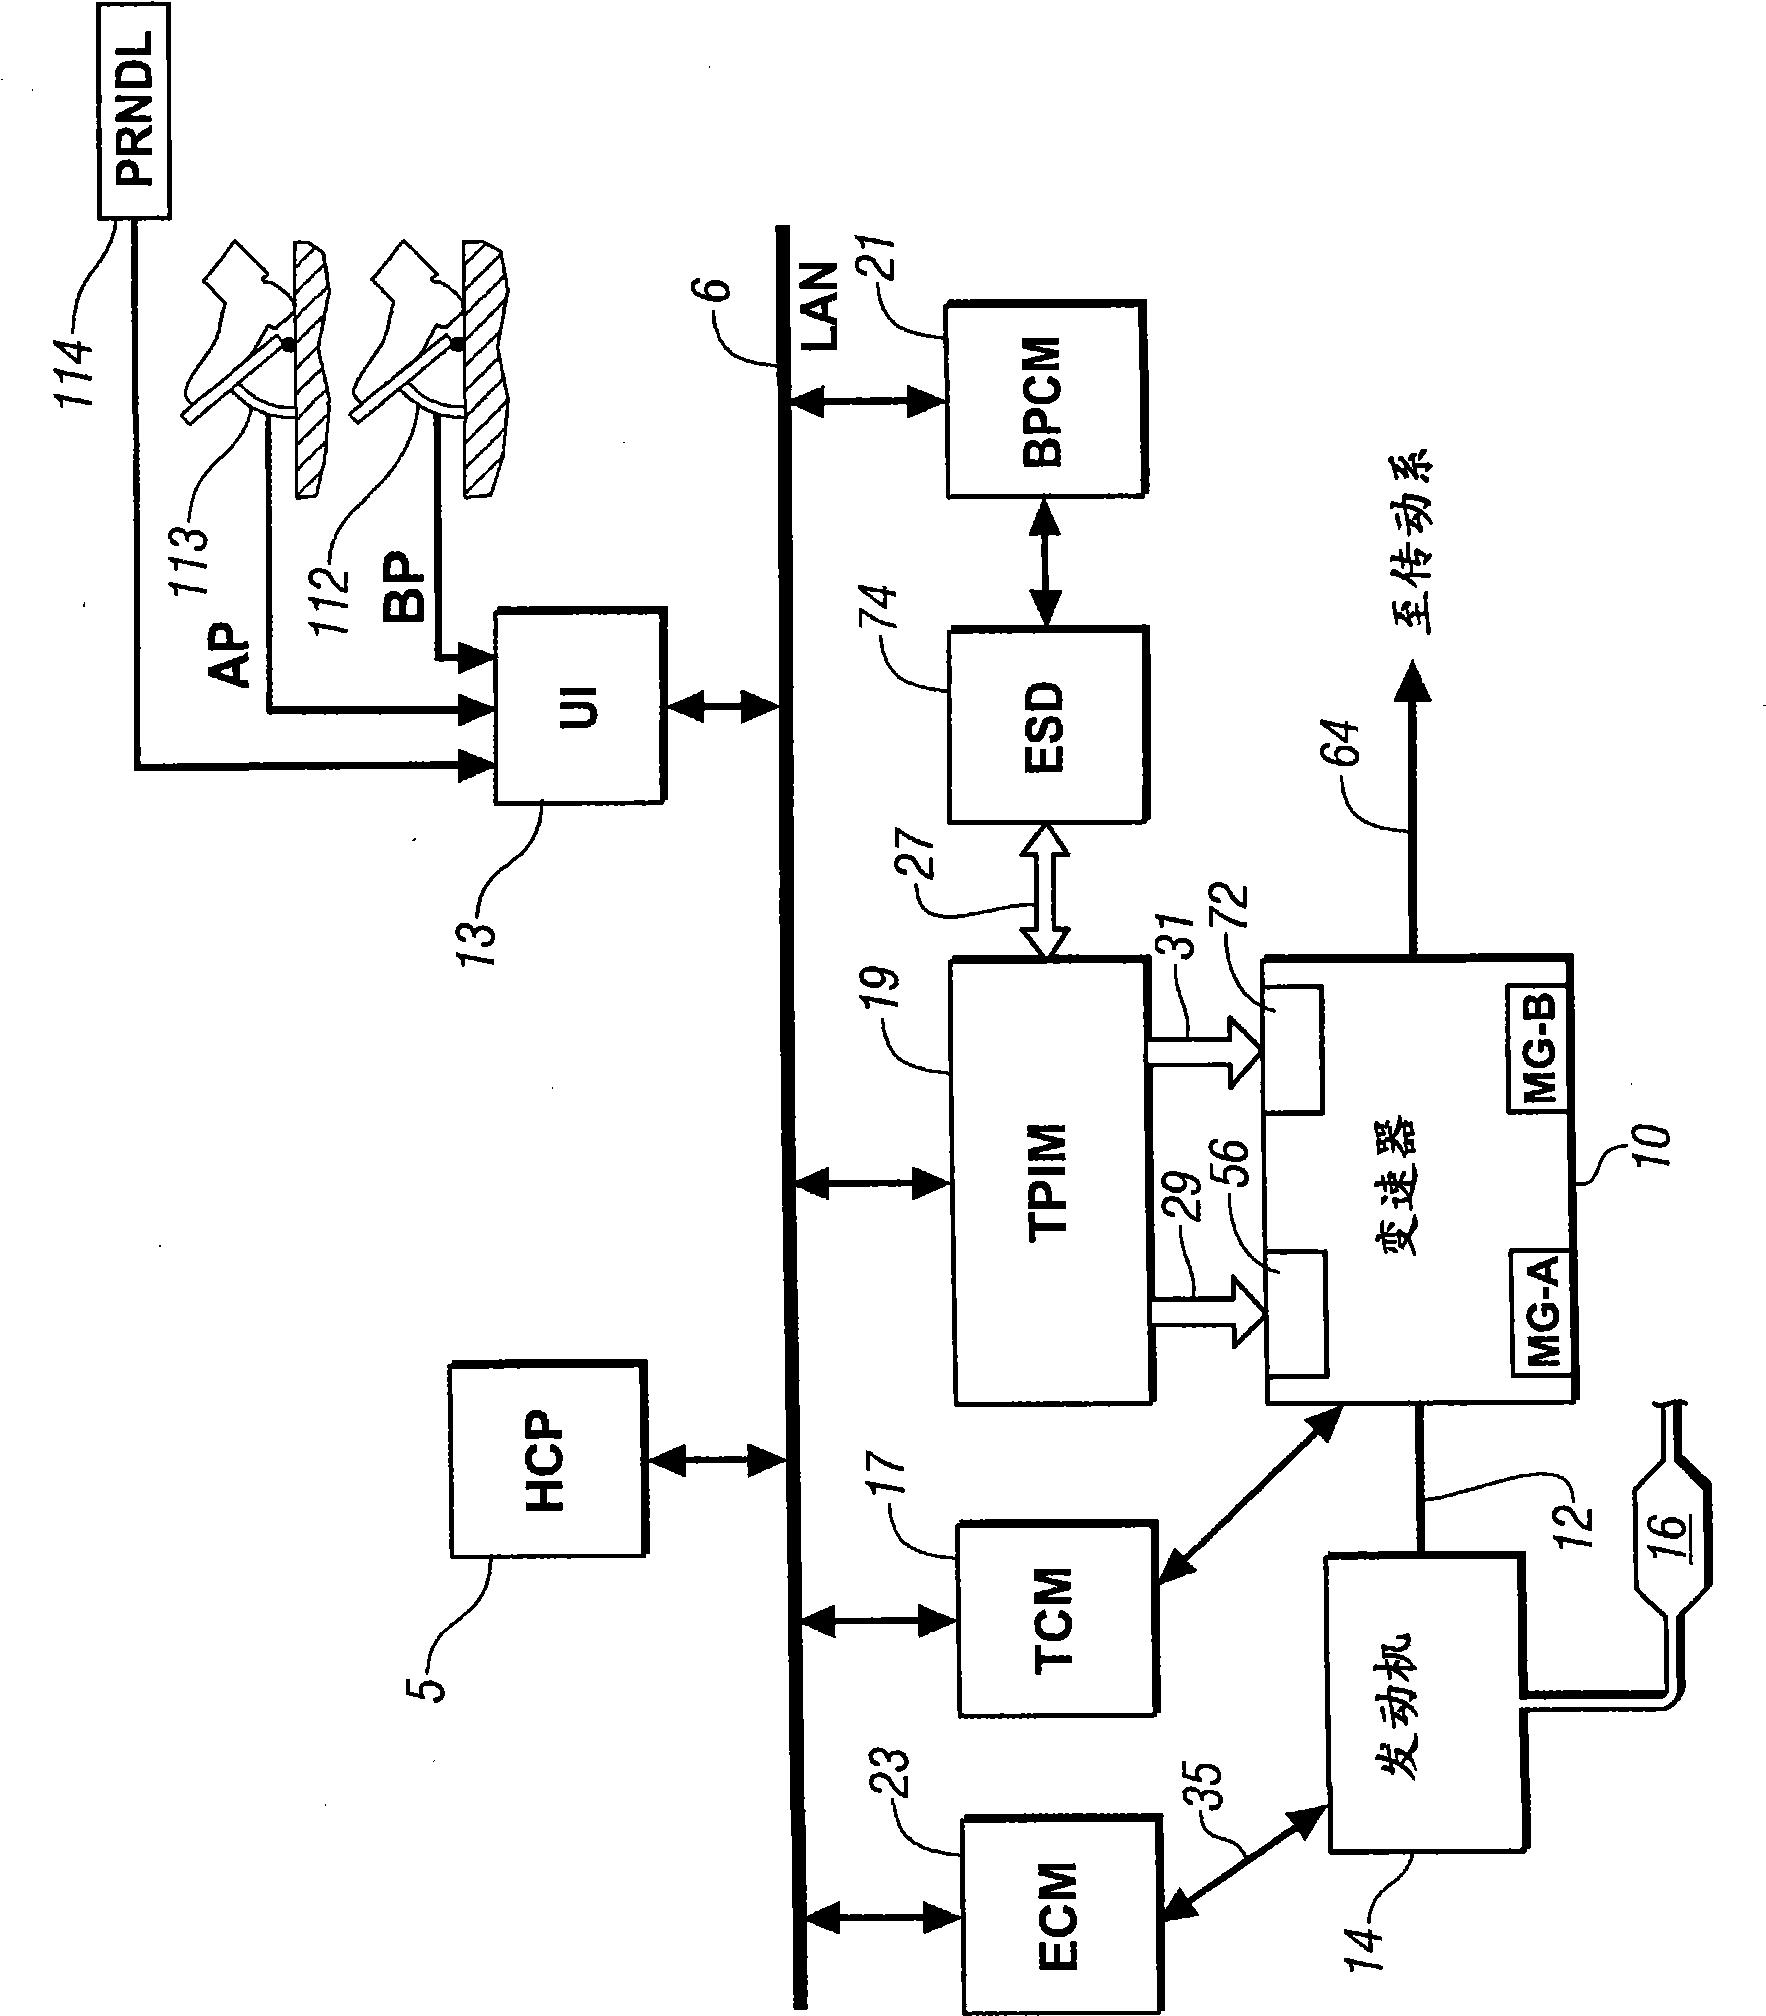 Method and apparatus to control engine temperature for a hybrid powertrain